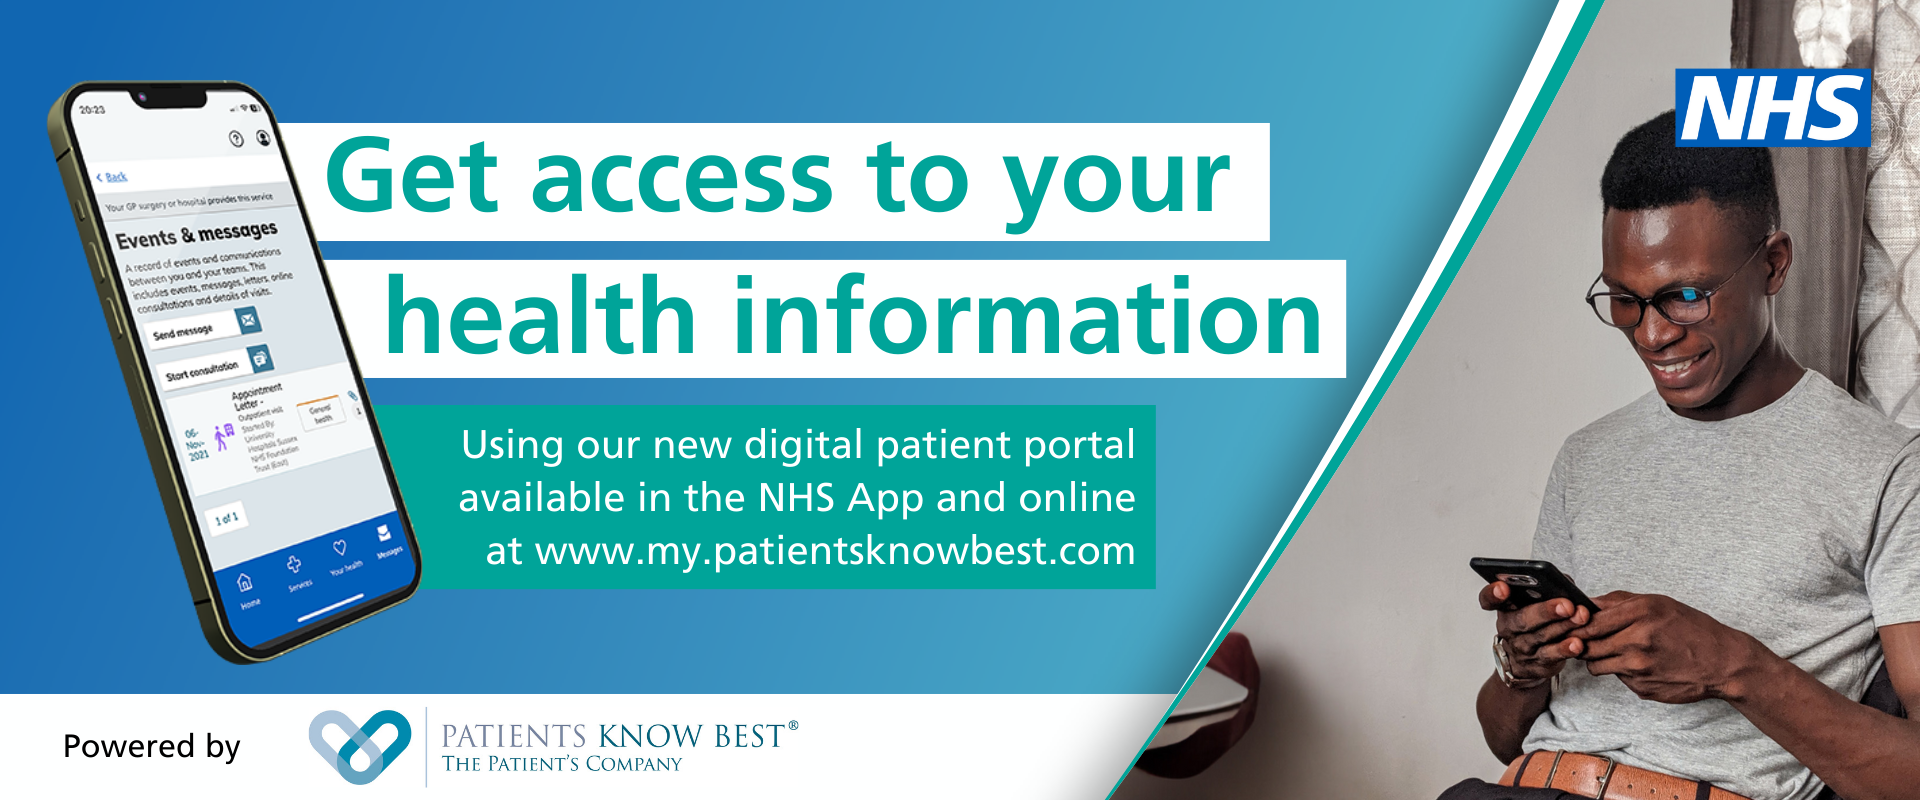 Blue background, NHS logo. Image of a mobile phone and text 'Get access to your health information'. Man looking at his phone.